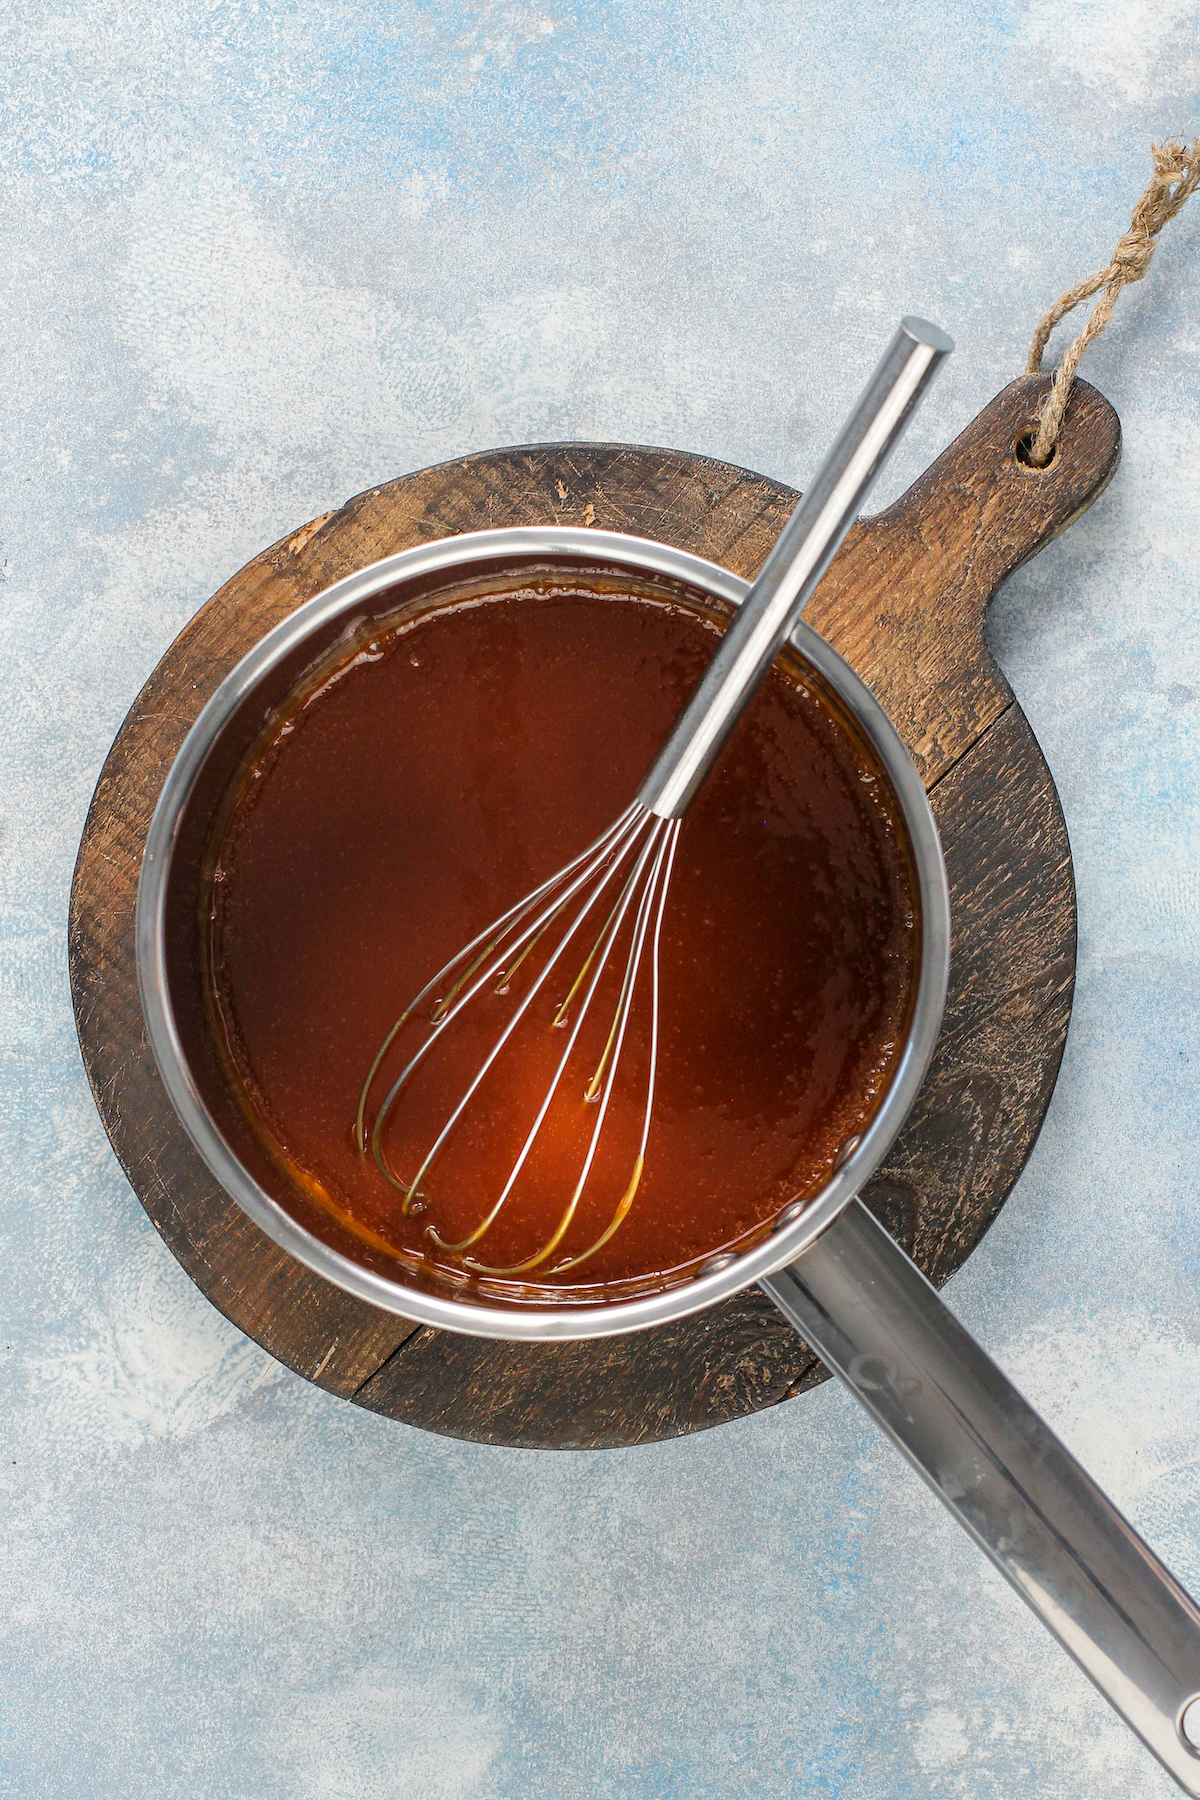 Finished caramel sauce in a saucepan with a whisk.